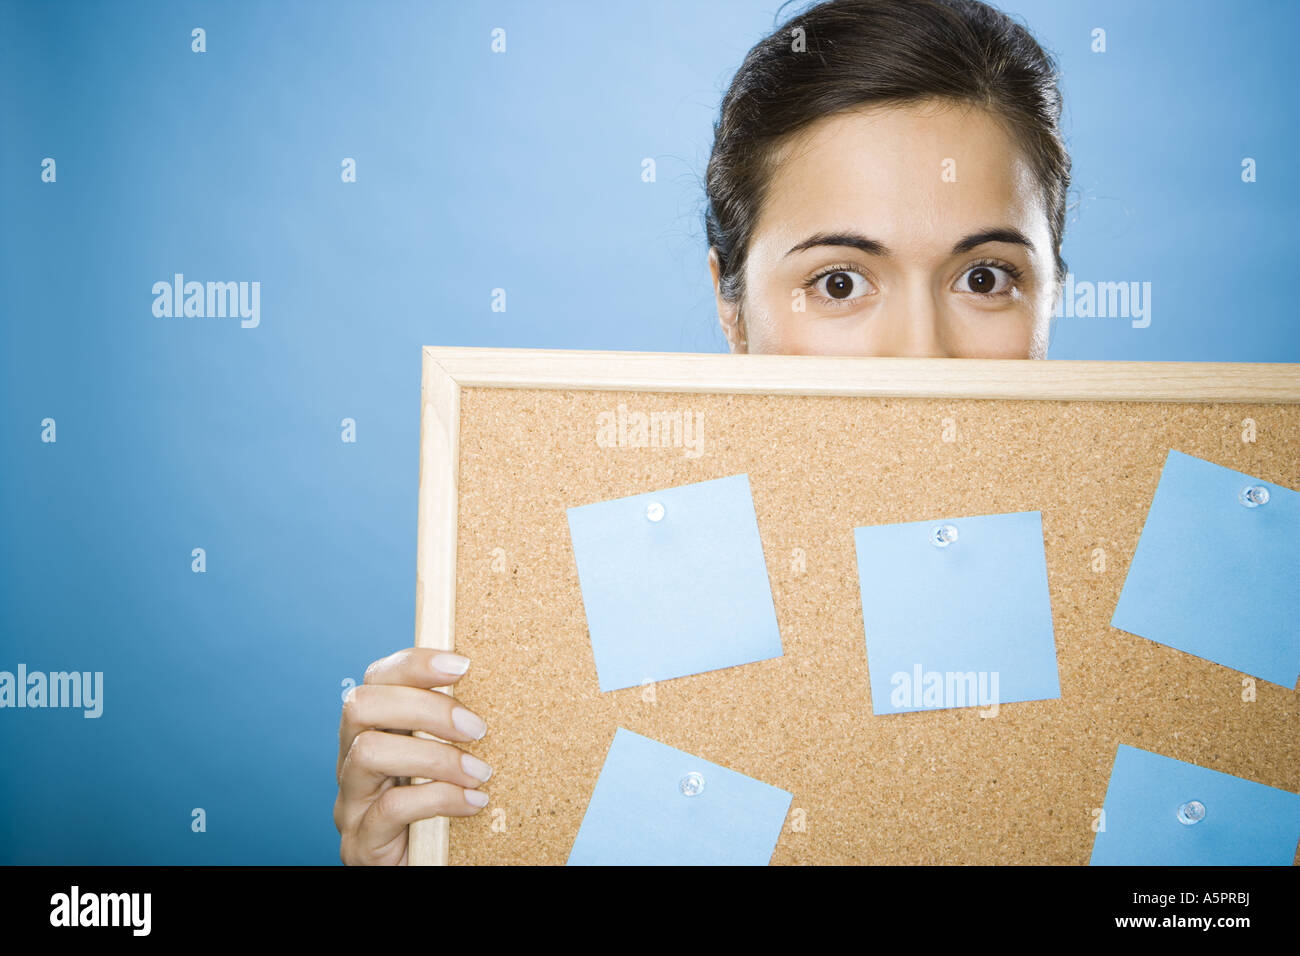 Close-up of a young woman holding a bulletin board against her face Stock Photo